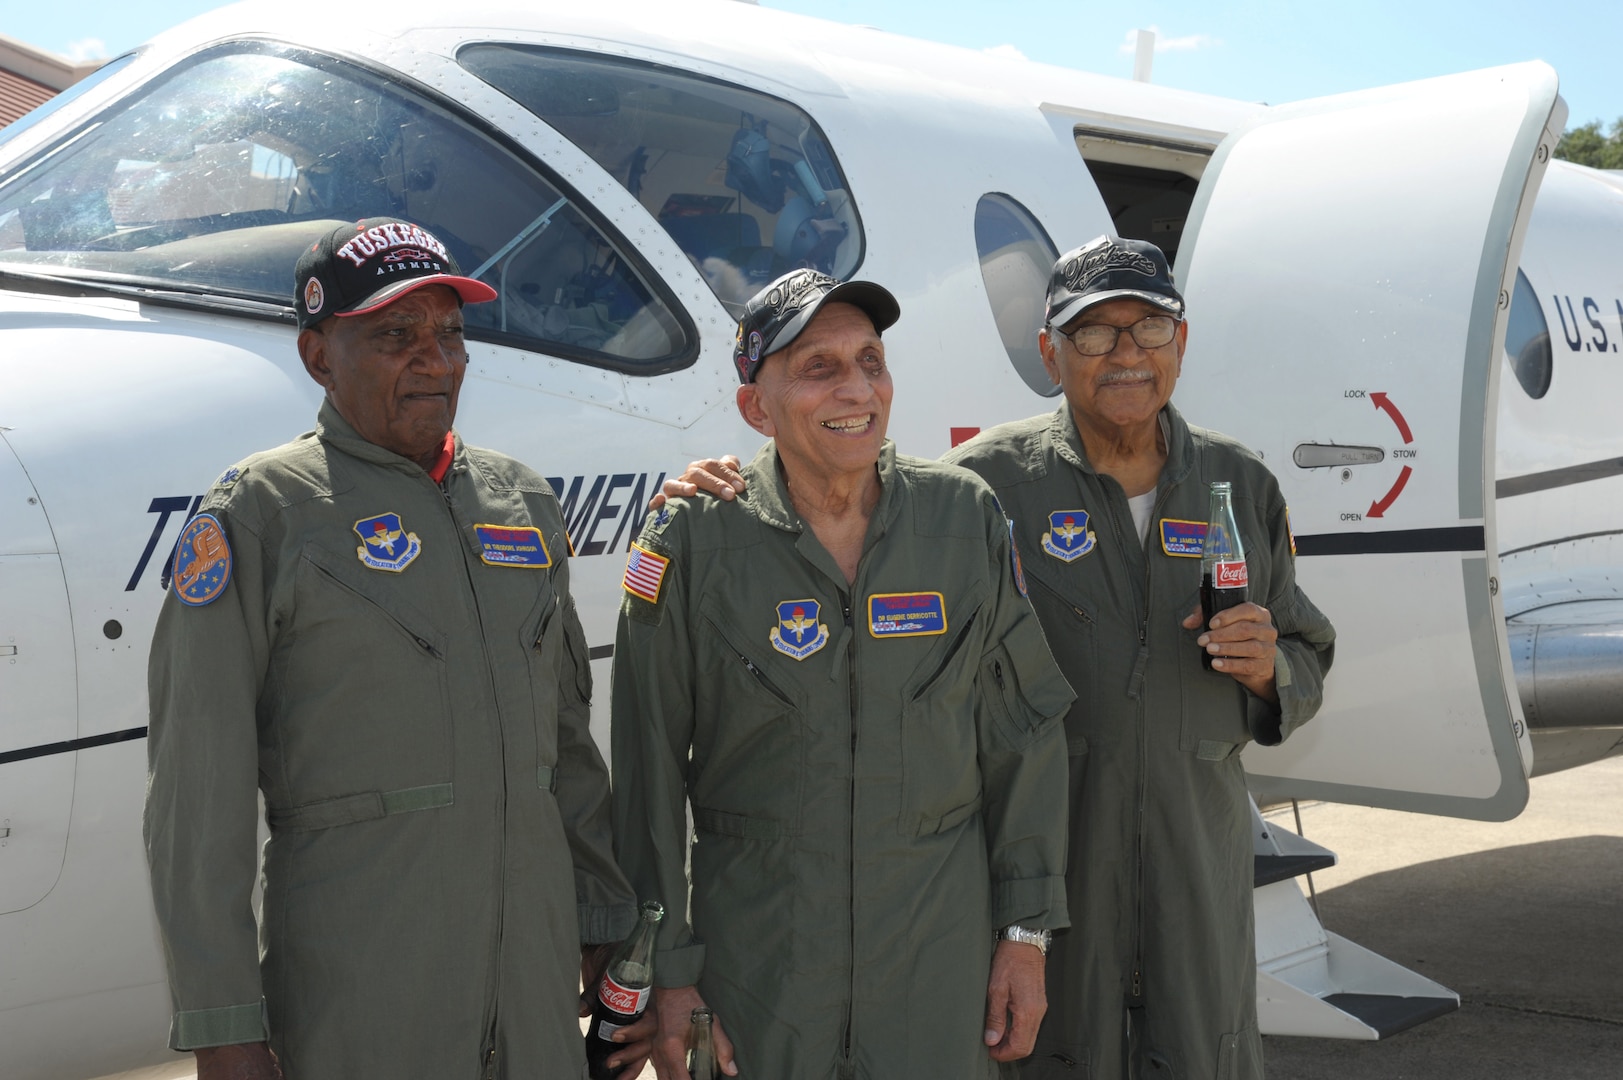 Theodore Johnson, left, Dr. Eugene Derricotte and James Bynum, original Tuskegee Airmen, pose for a photo in front a T-1 Jayhawk aircraft, during the Tuskegee Airmen Tribute 2015, June 11, at Joint Base San Antonio-Randolph. The Tuskegee Airmen were the first African-American military aviators in the United States Armed Forces beginning in World War II.  (U.S. Air Force photo by Joel Martinez)